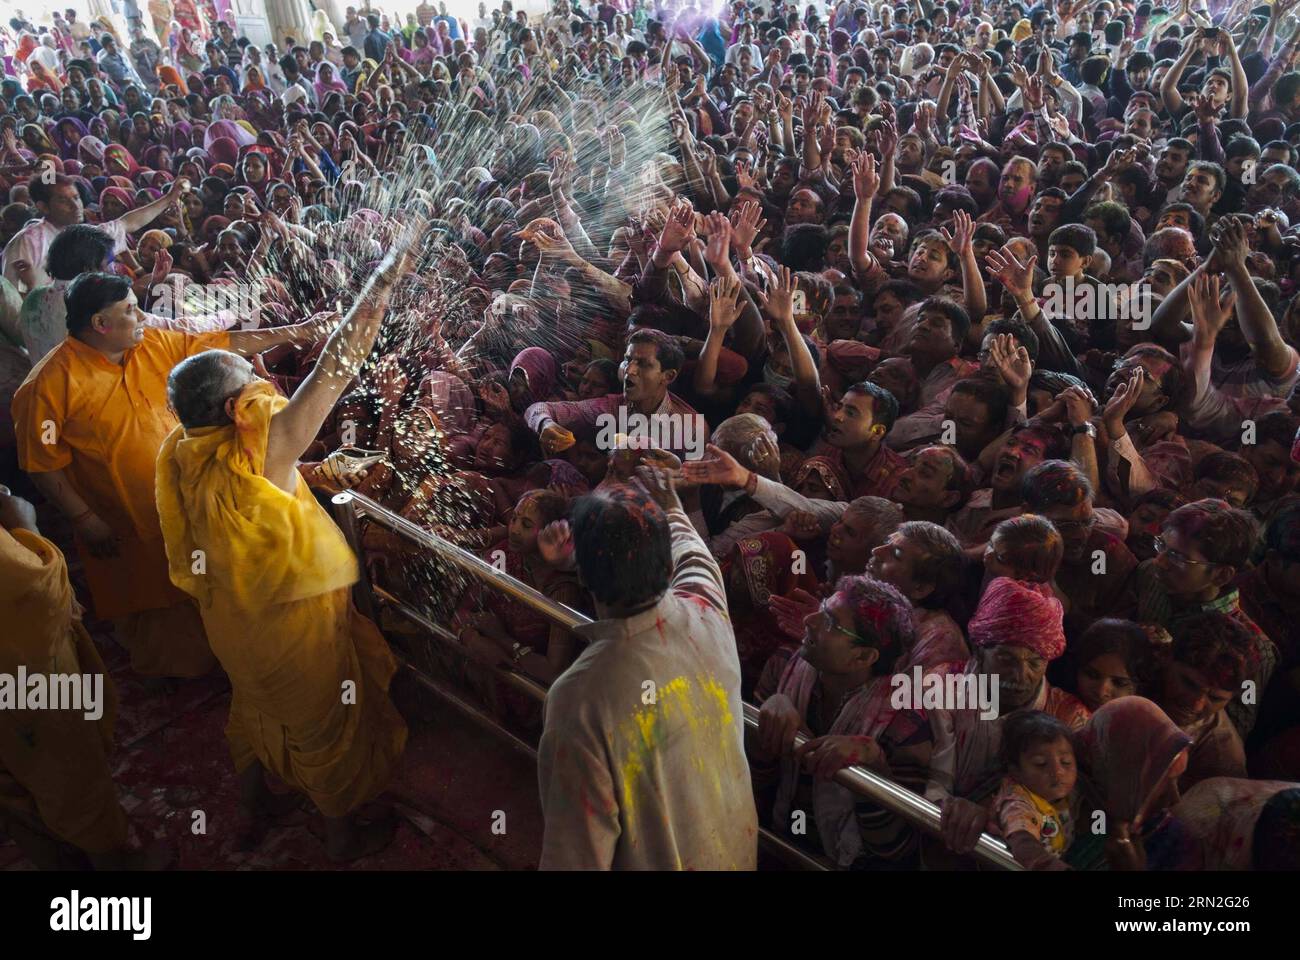 (150305) -- JAIPUR, March 5, 2015 -- Indian Hindu devotees celebrate the Holi festival at the Govind Dev Ji temple in Jaipur, India, March 5, 2015. The tradition of Holi, also known as the festival of colors, is celebrated to mark the beginning of spring season. ) INDIA-JAIPUR-HOLI FESTIVAL TumpaxMondal PUBLICATIONxNOTxINxCHN   Jaipur March 5 2015 Indian Hindu devotees Celebrate The Holi Festival AT The Govind Dev ji Temple in Jaipur India March 5 2015 The Tradition of Holi Thus known As The Festival of Colors IS celebrated to Mark The BEGINNING of Spring Season India Jaipur Holi Festival  PUB Stock Photo